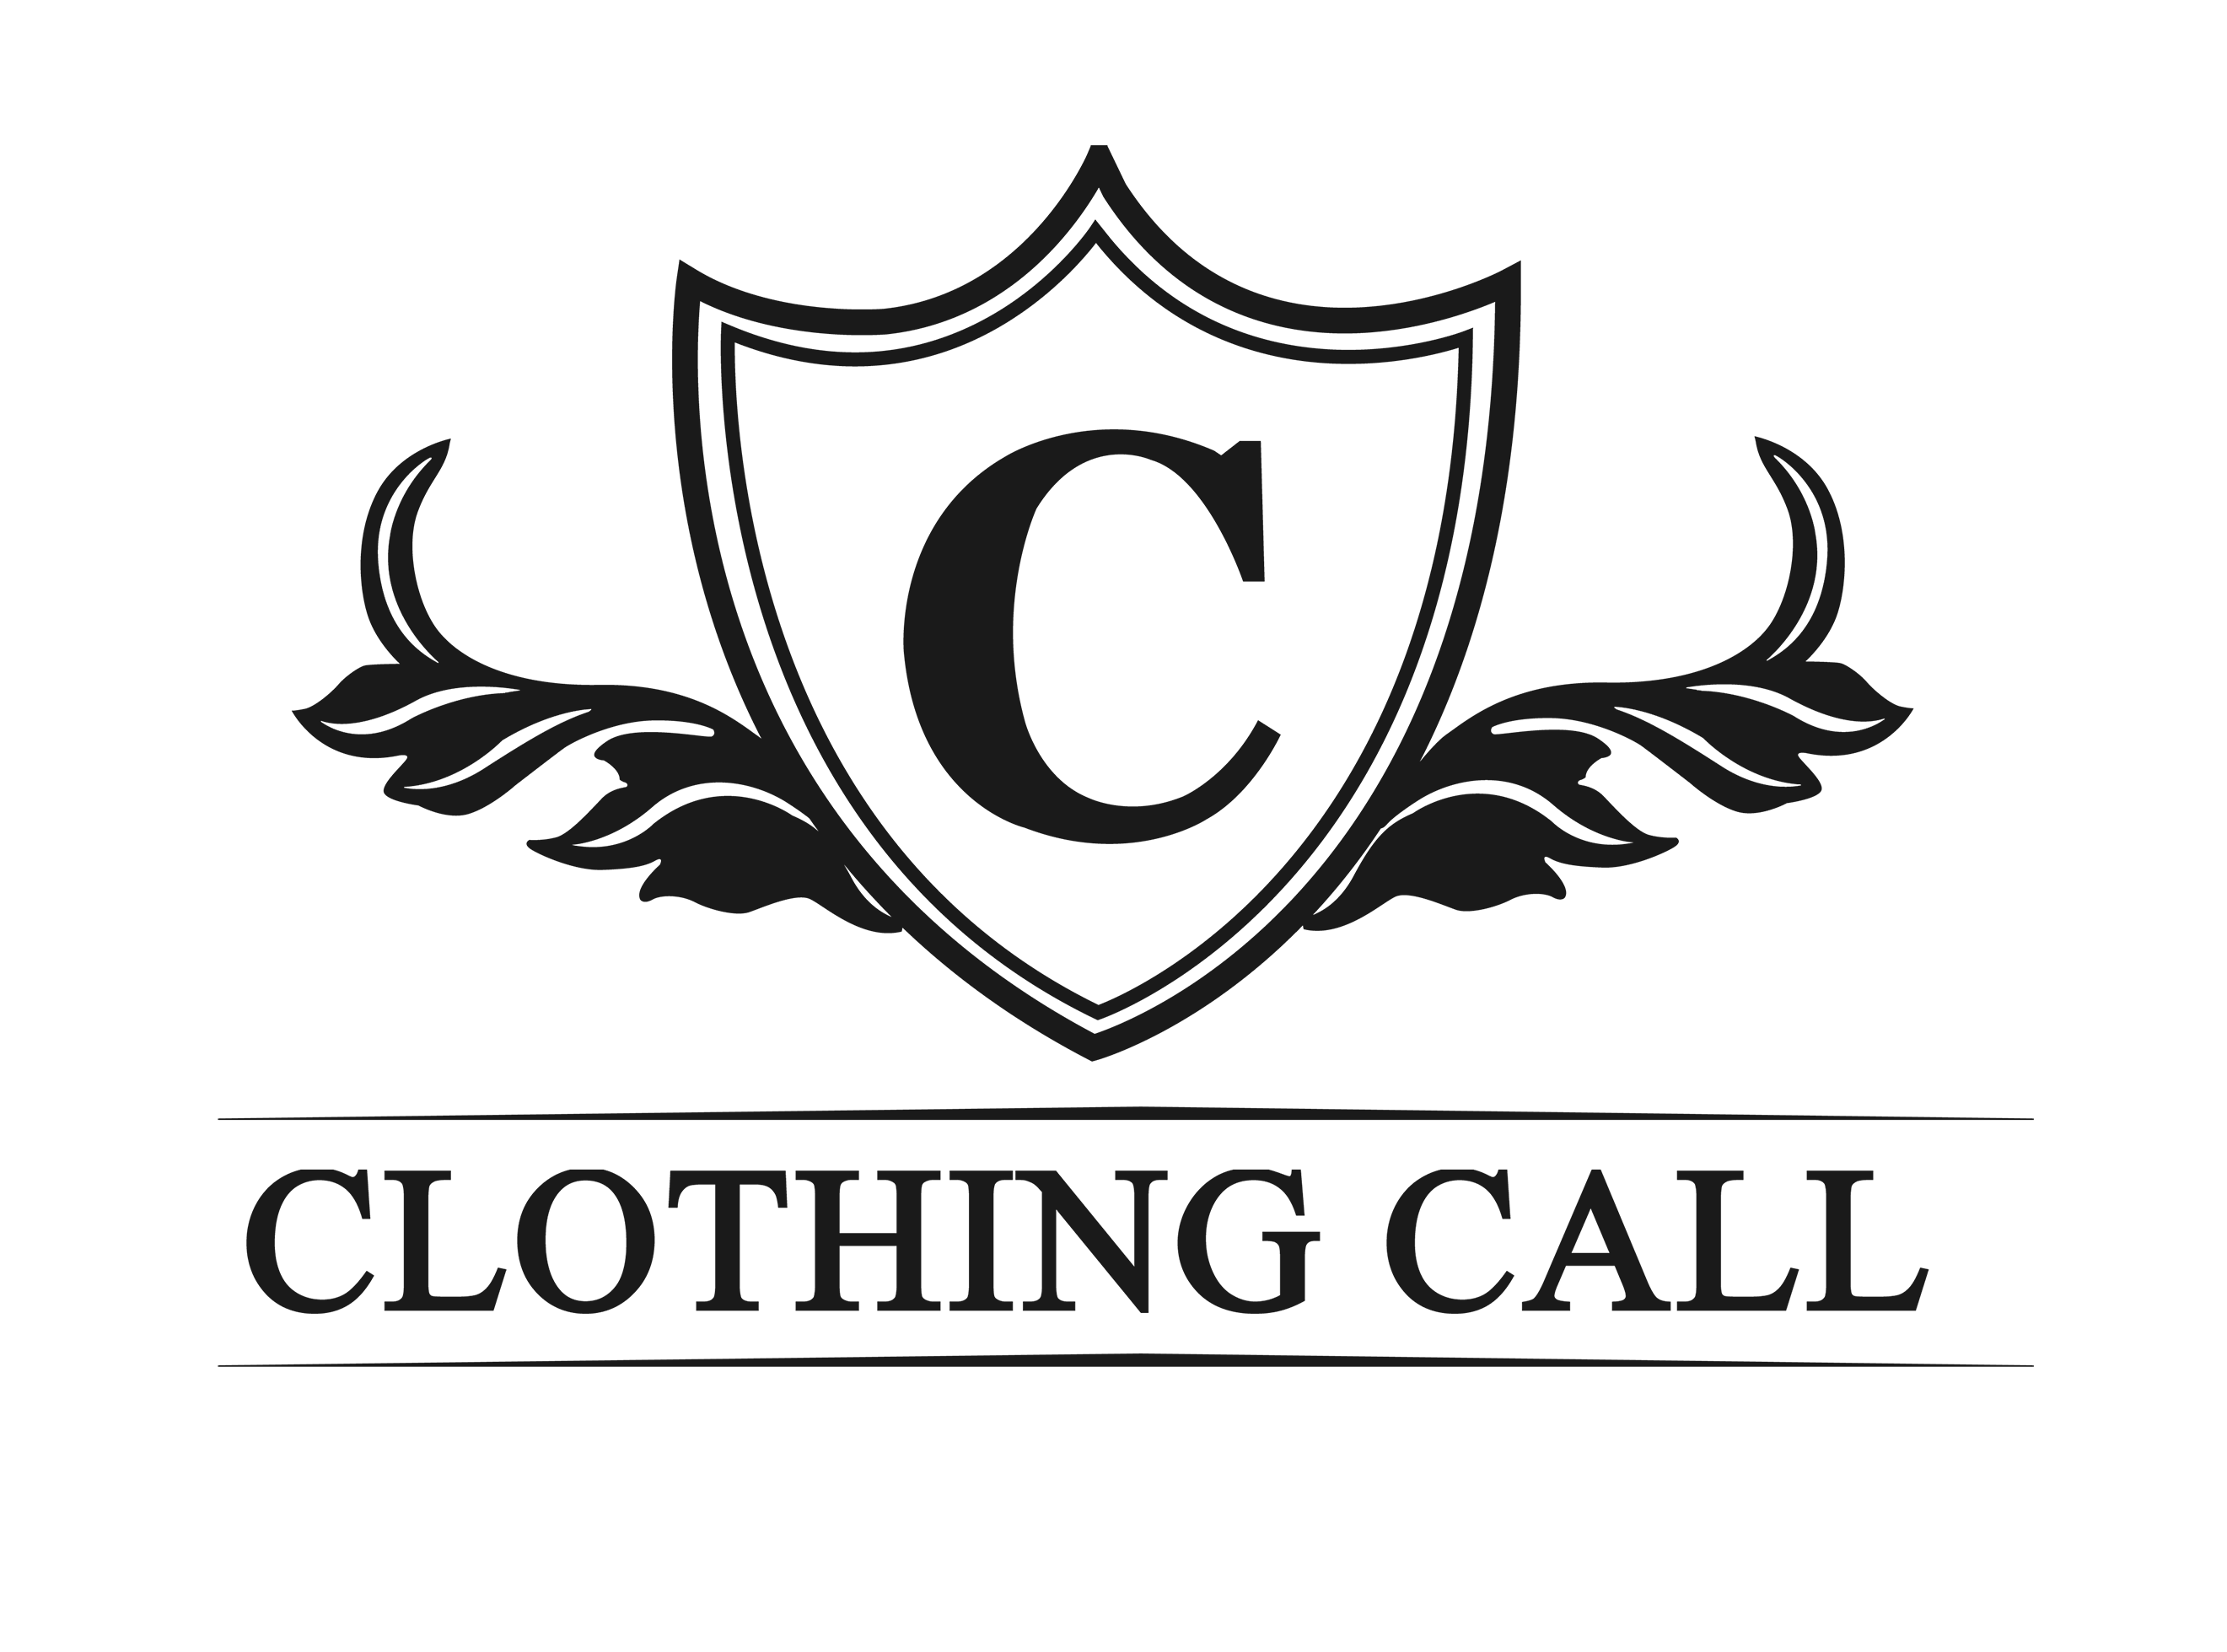 Clothing Call - Your Multi Brand Store.